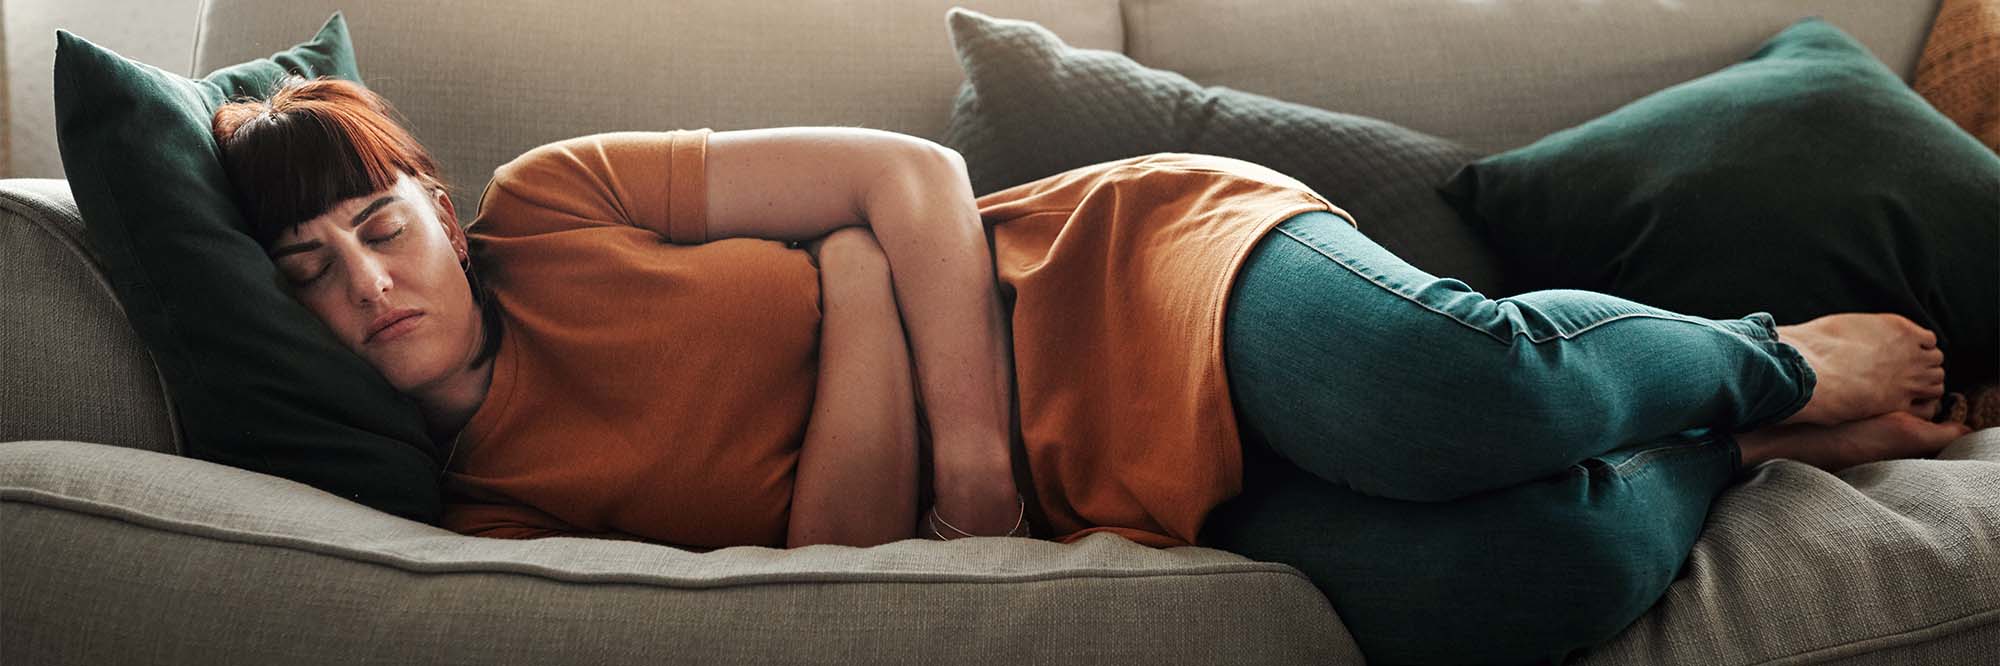  A woman lays on a couch frowning with her arms wrapped around her lower stomach